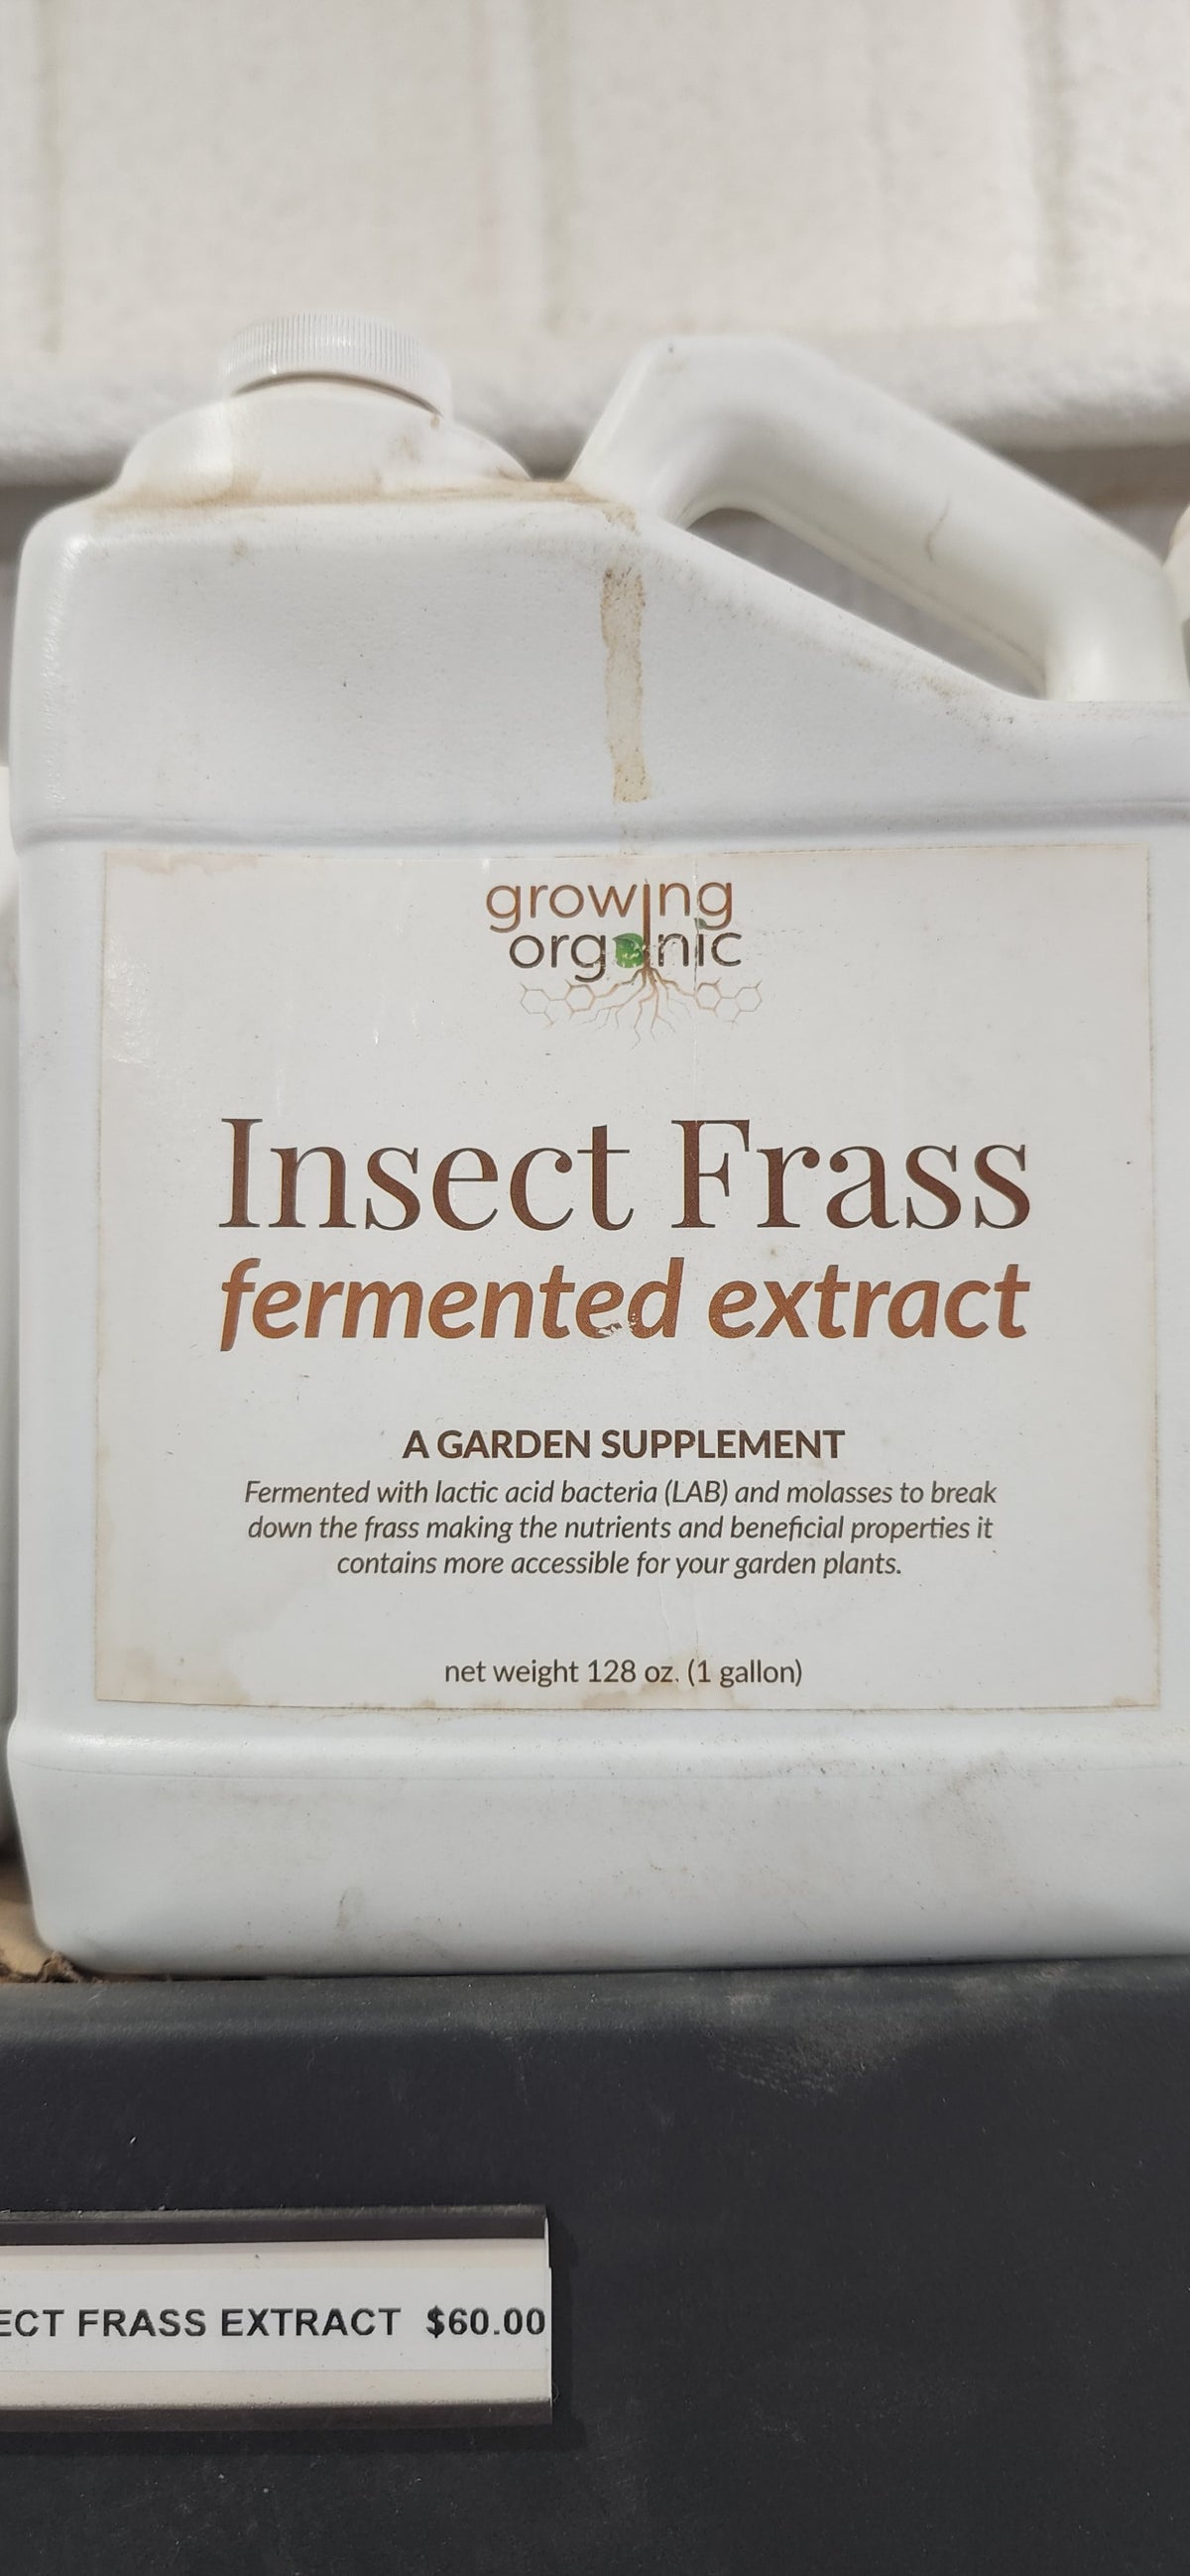 Insect Frass Fermented Extract